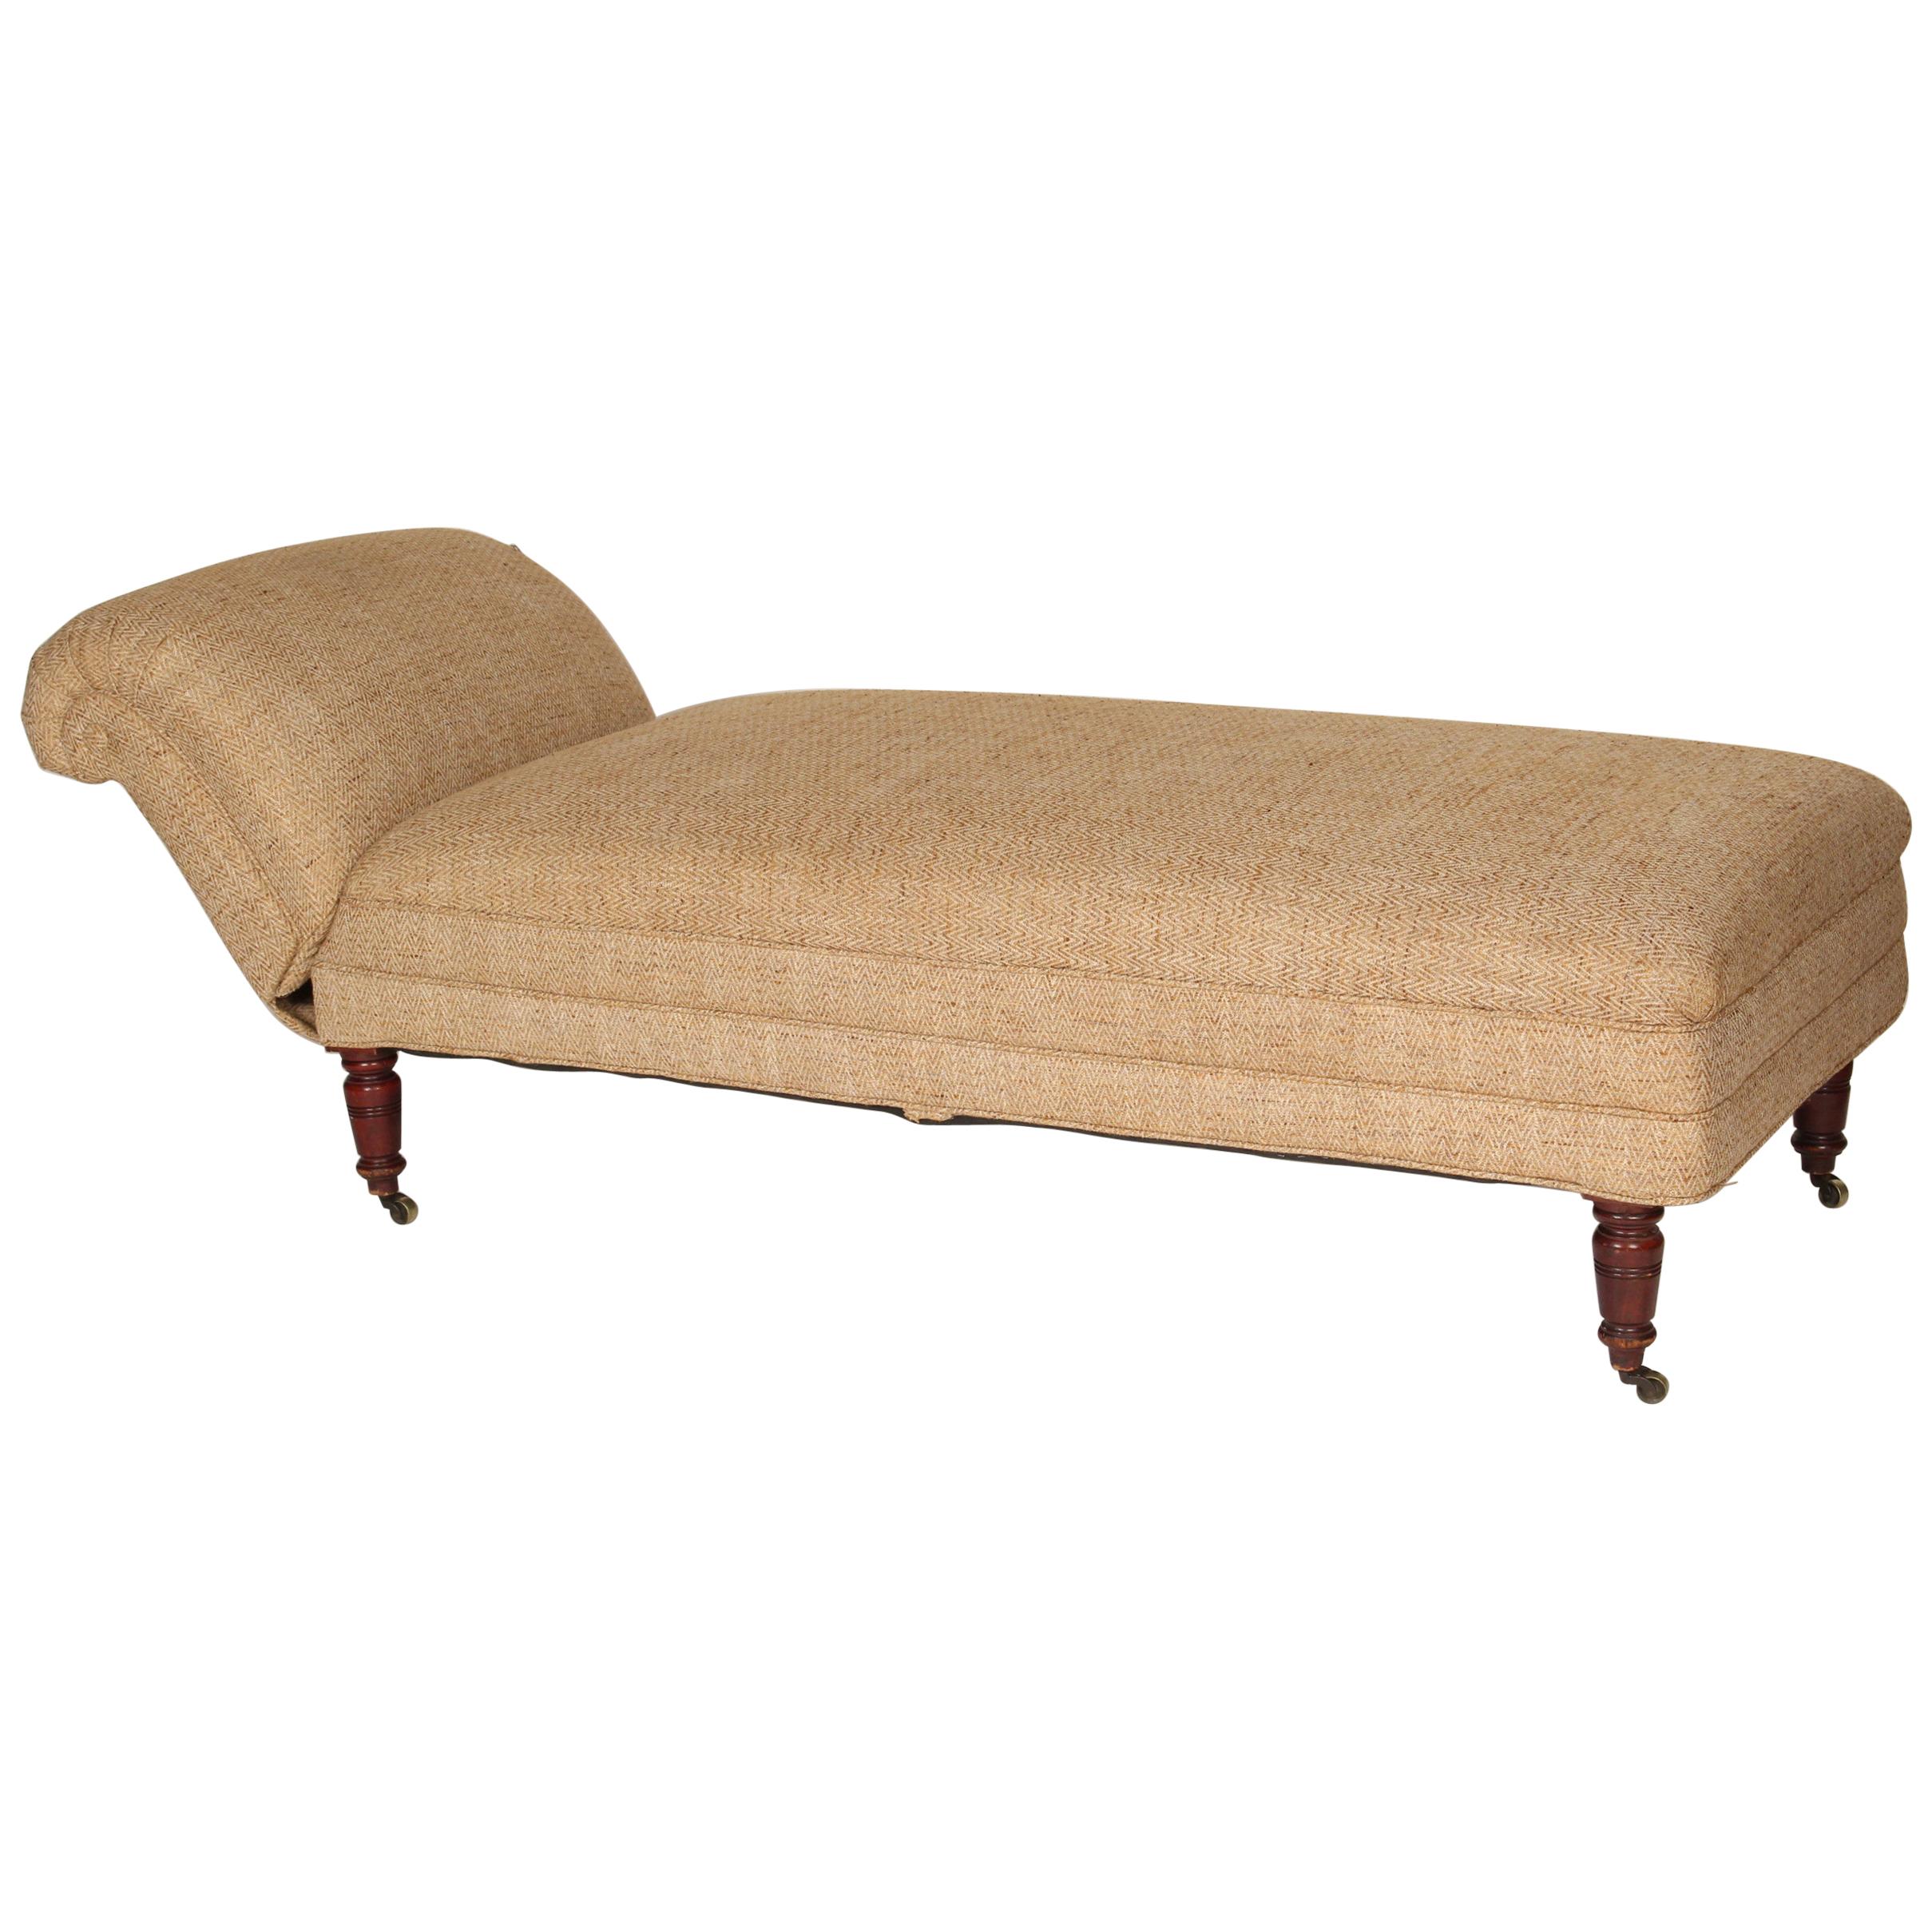 English Chaise Lounge with Adjustable Back